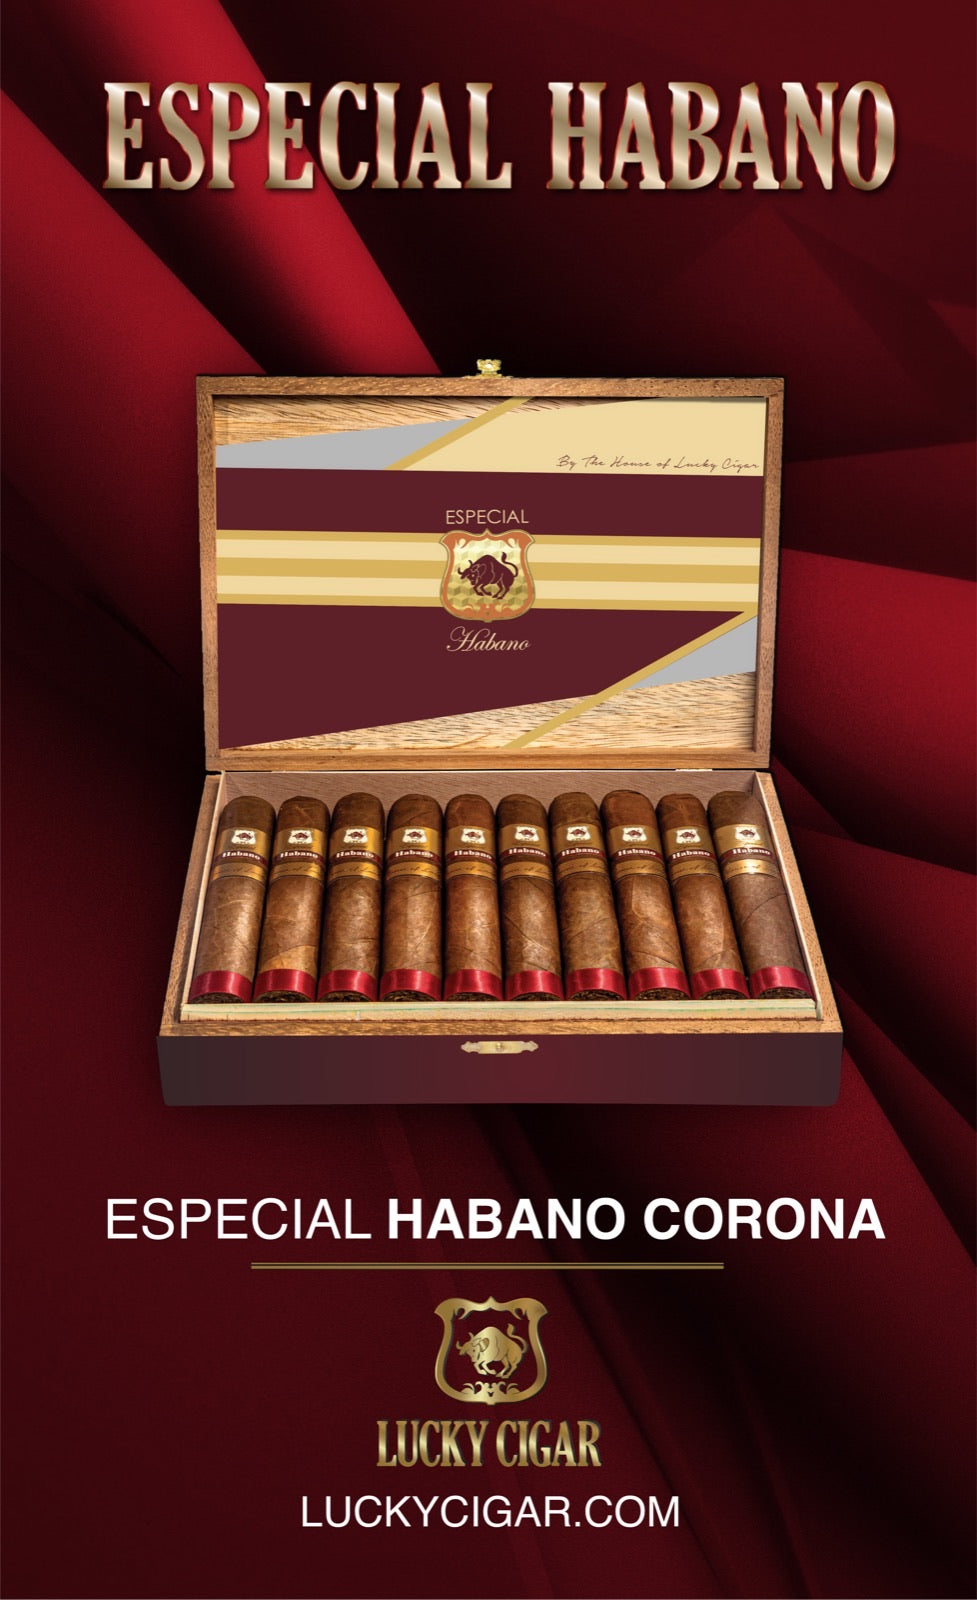 Especial Habano by The House of Lucky Cigar 20 Piece Box of Size Corona 5x48